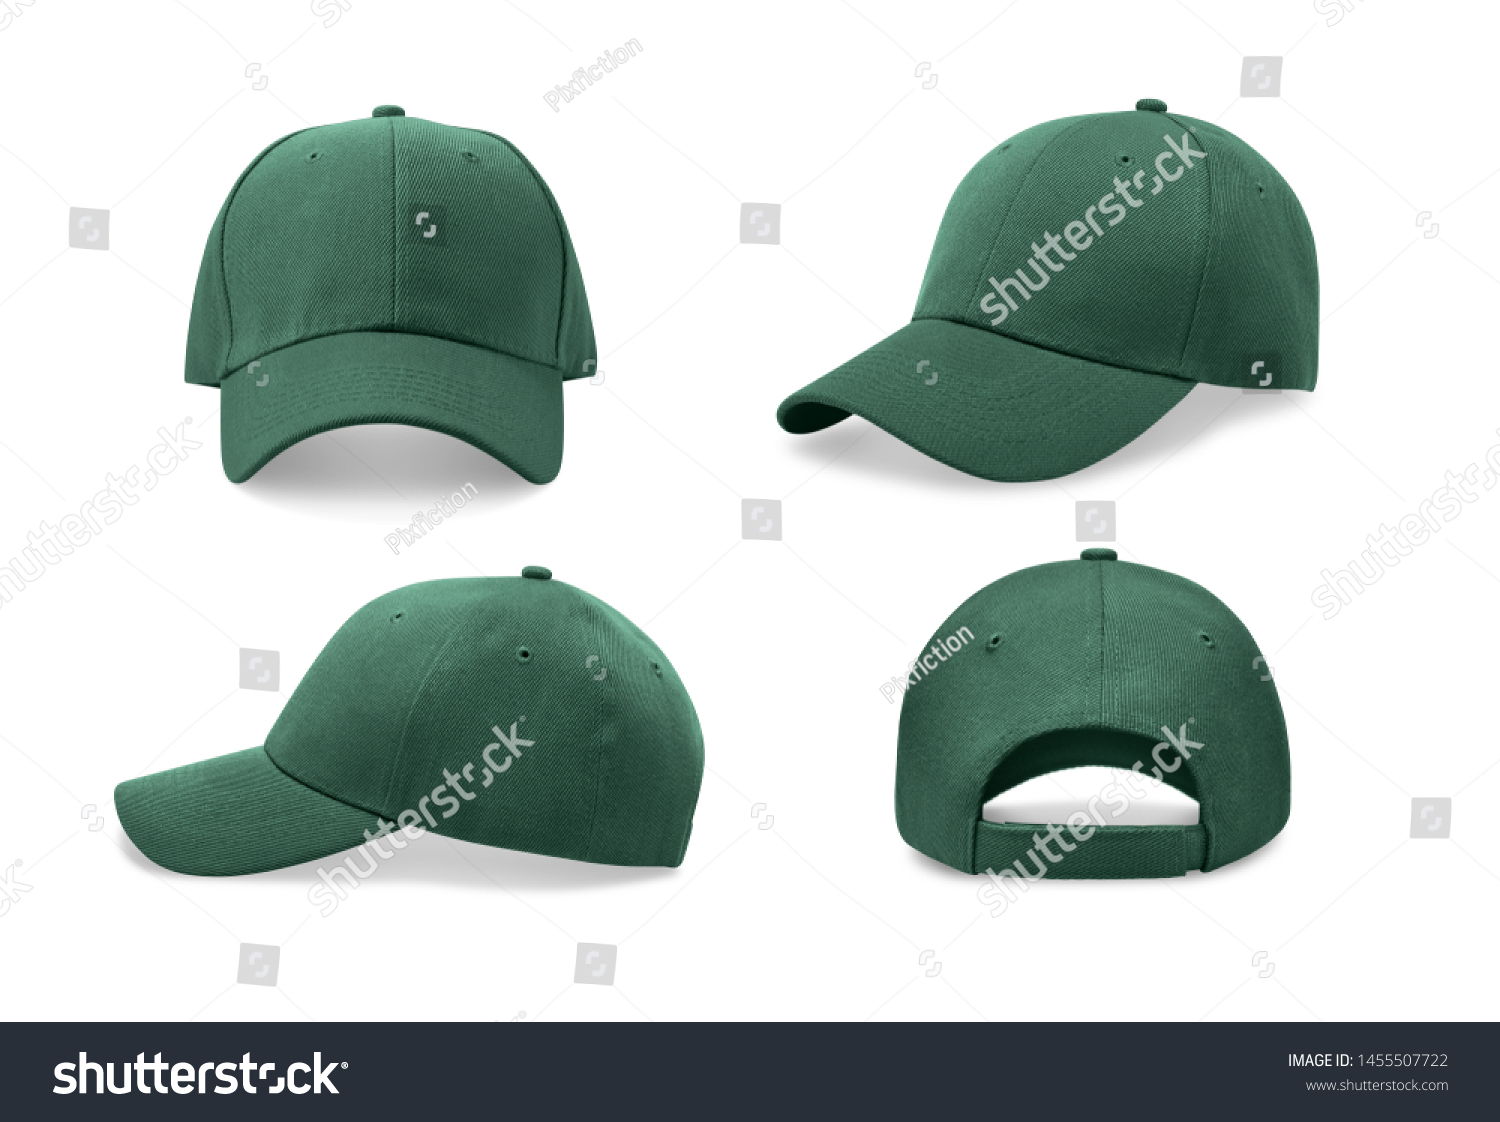 Green baseball cap in four different angles views. Mock up.
 #1455507722